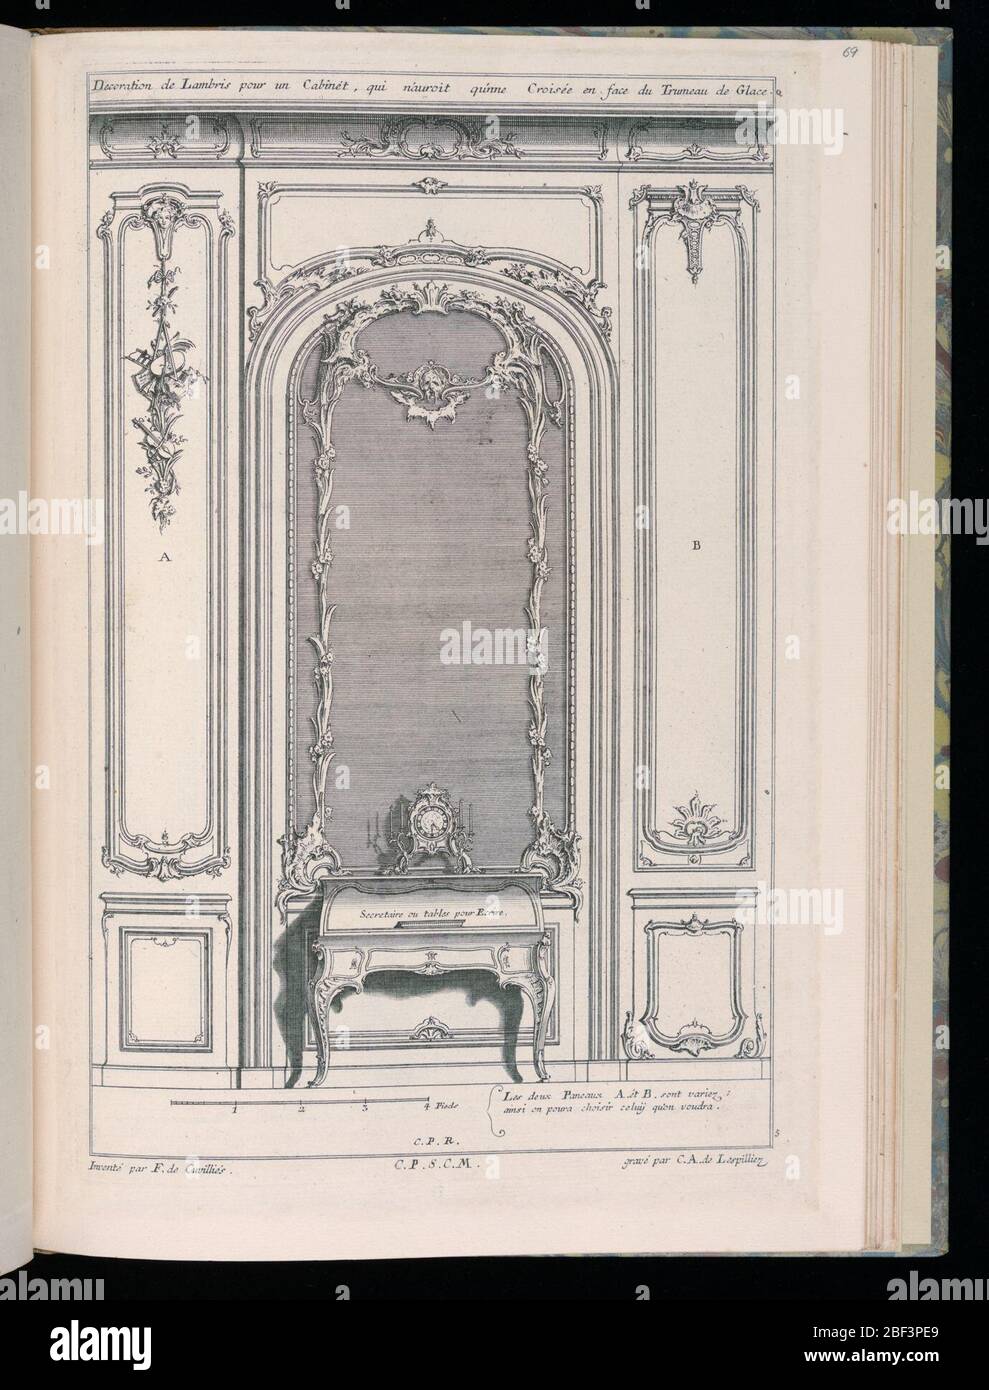 Wall with Mirror and Secretary Desk Desseins de Lambris Wainscoting Designs. Design for interior wall in Rococo style. At the center, a large arched mirror framed and decorated with ornament in the form of floral festoons, a mask hanging from the garland at upper center. Stock Photo